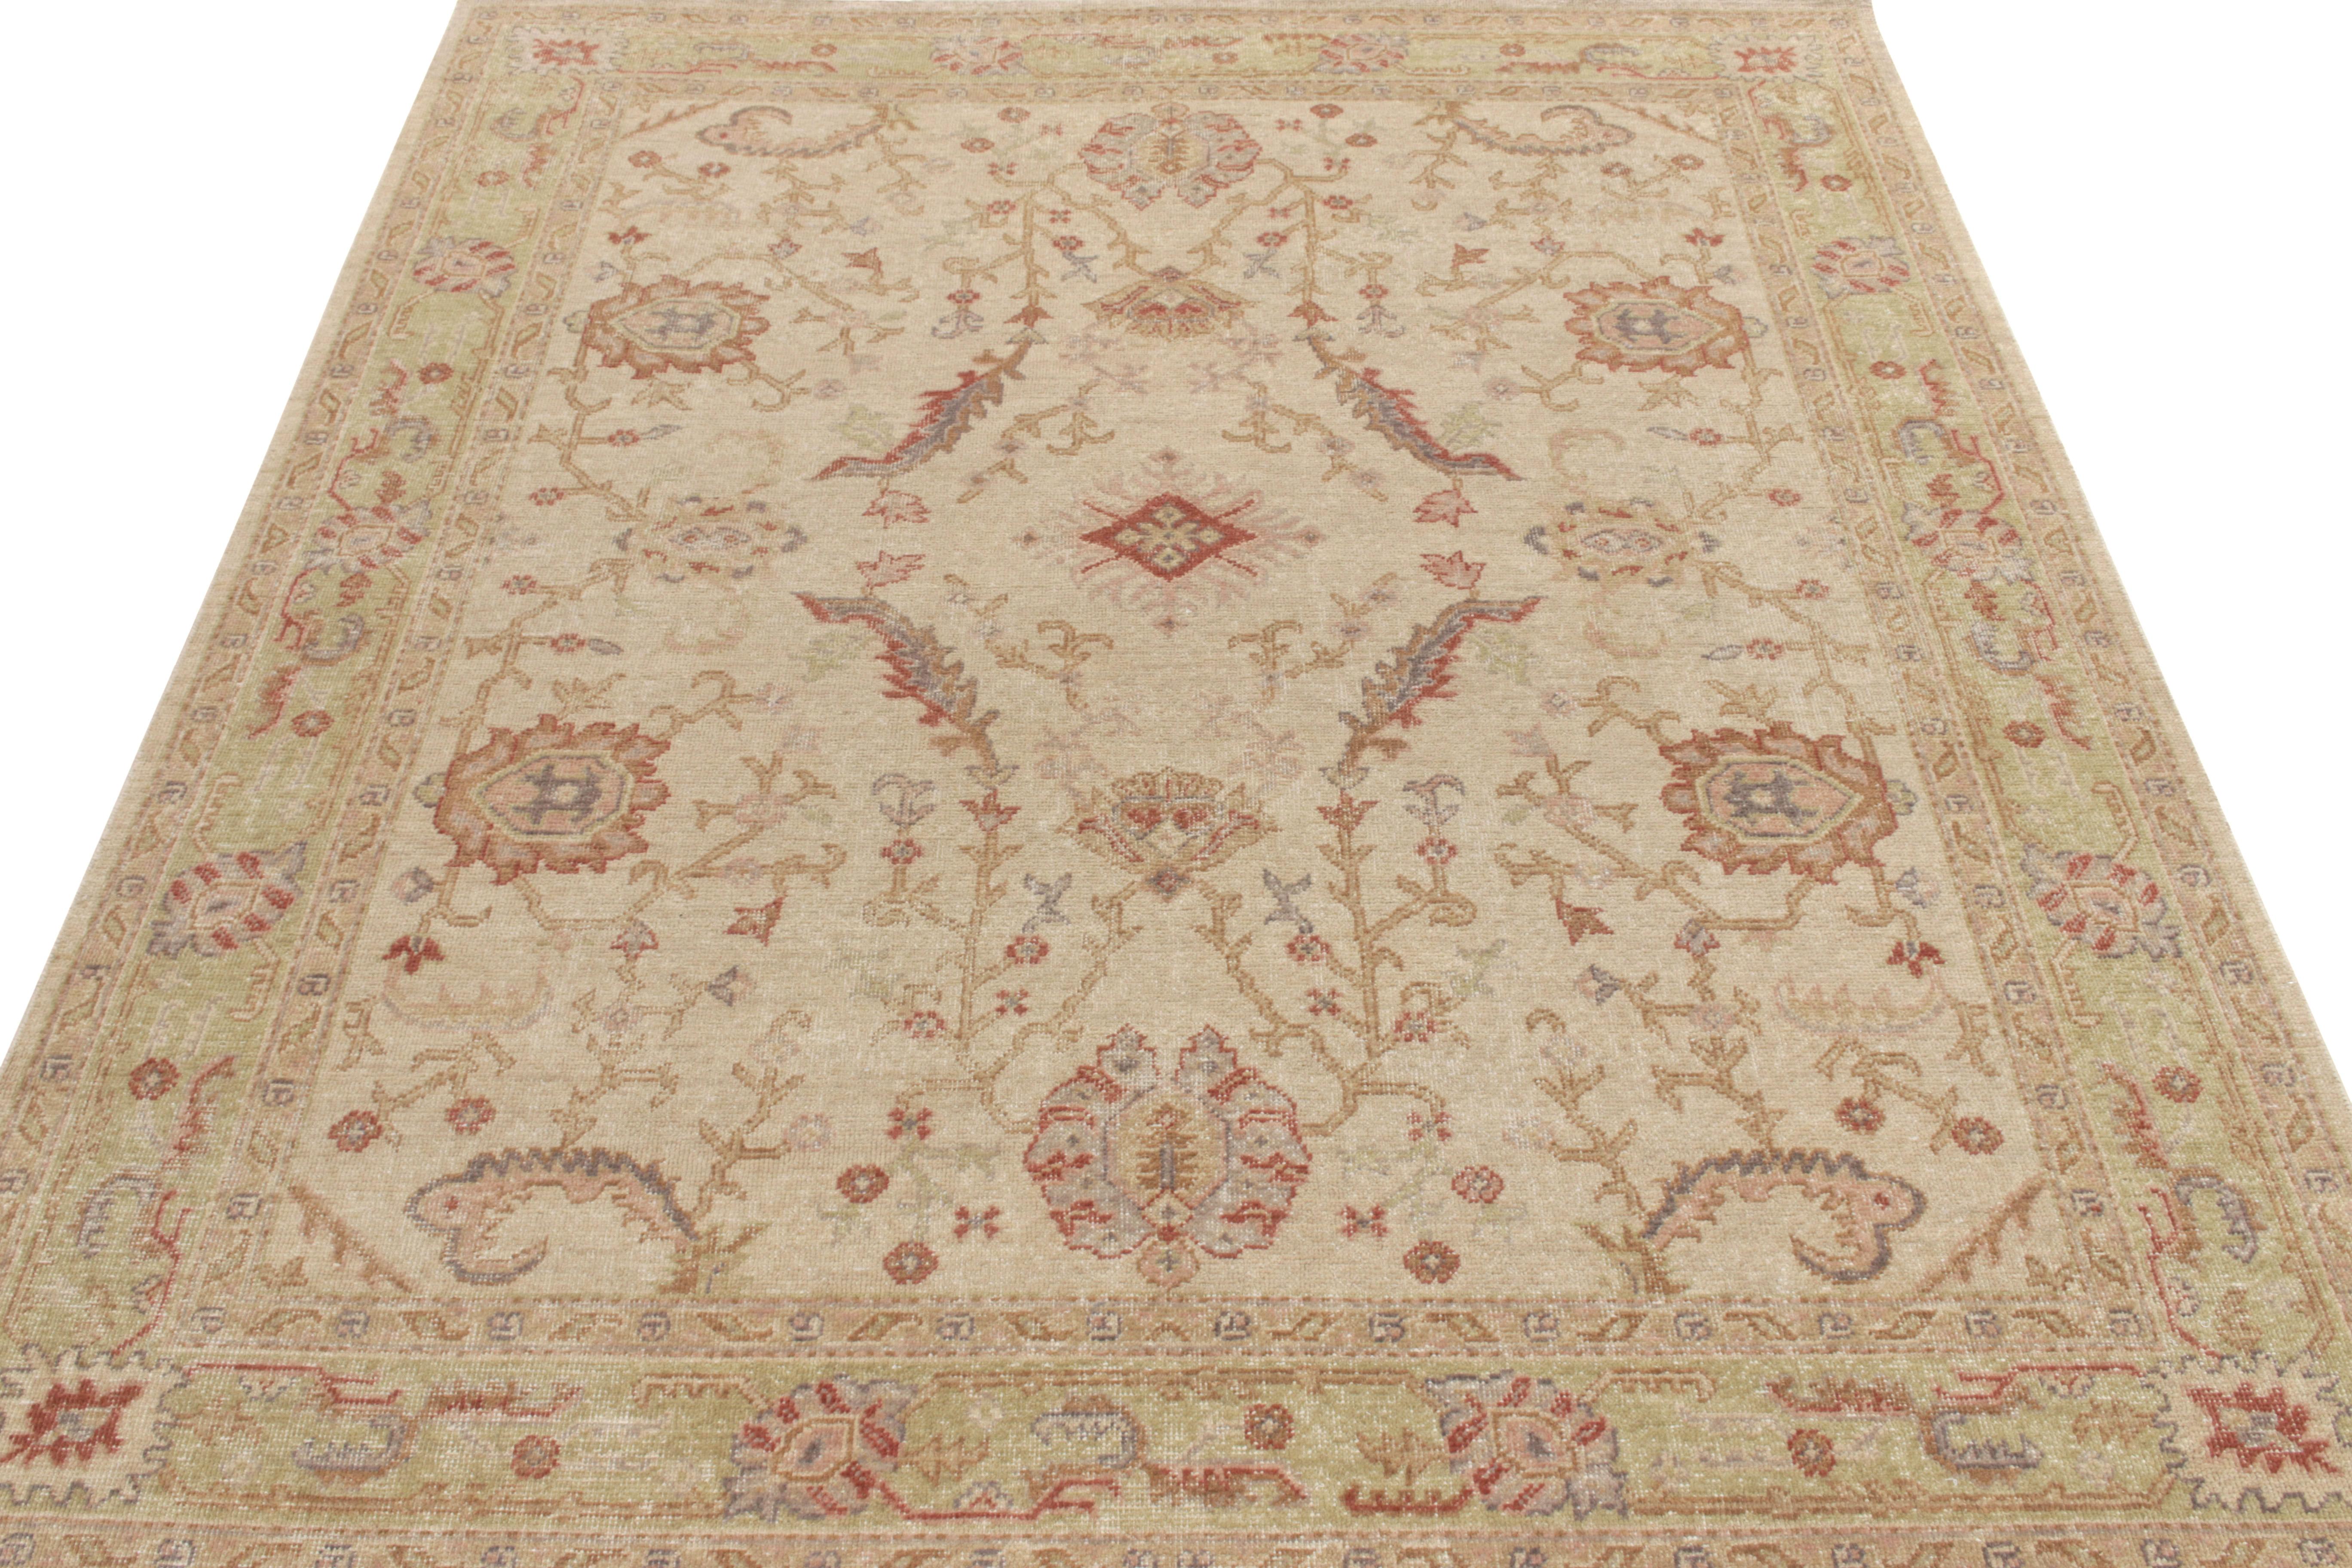 A classic custom rendering from Rug & Kilim’s Homage collection paying tribute to the celebrated Oushak style of rugs. Hand-knotted in wool, this 8x10 example rug braces a comforting cream-brown colorway perfectly flowing with the idyllic floral